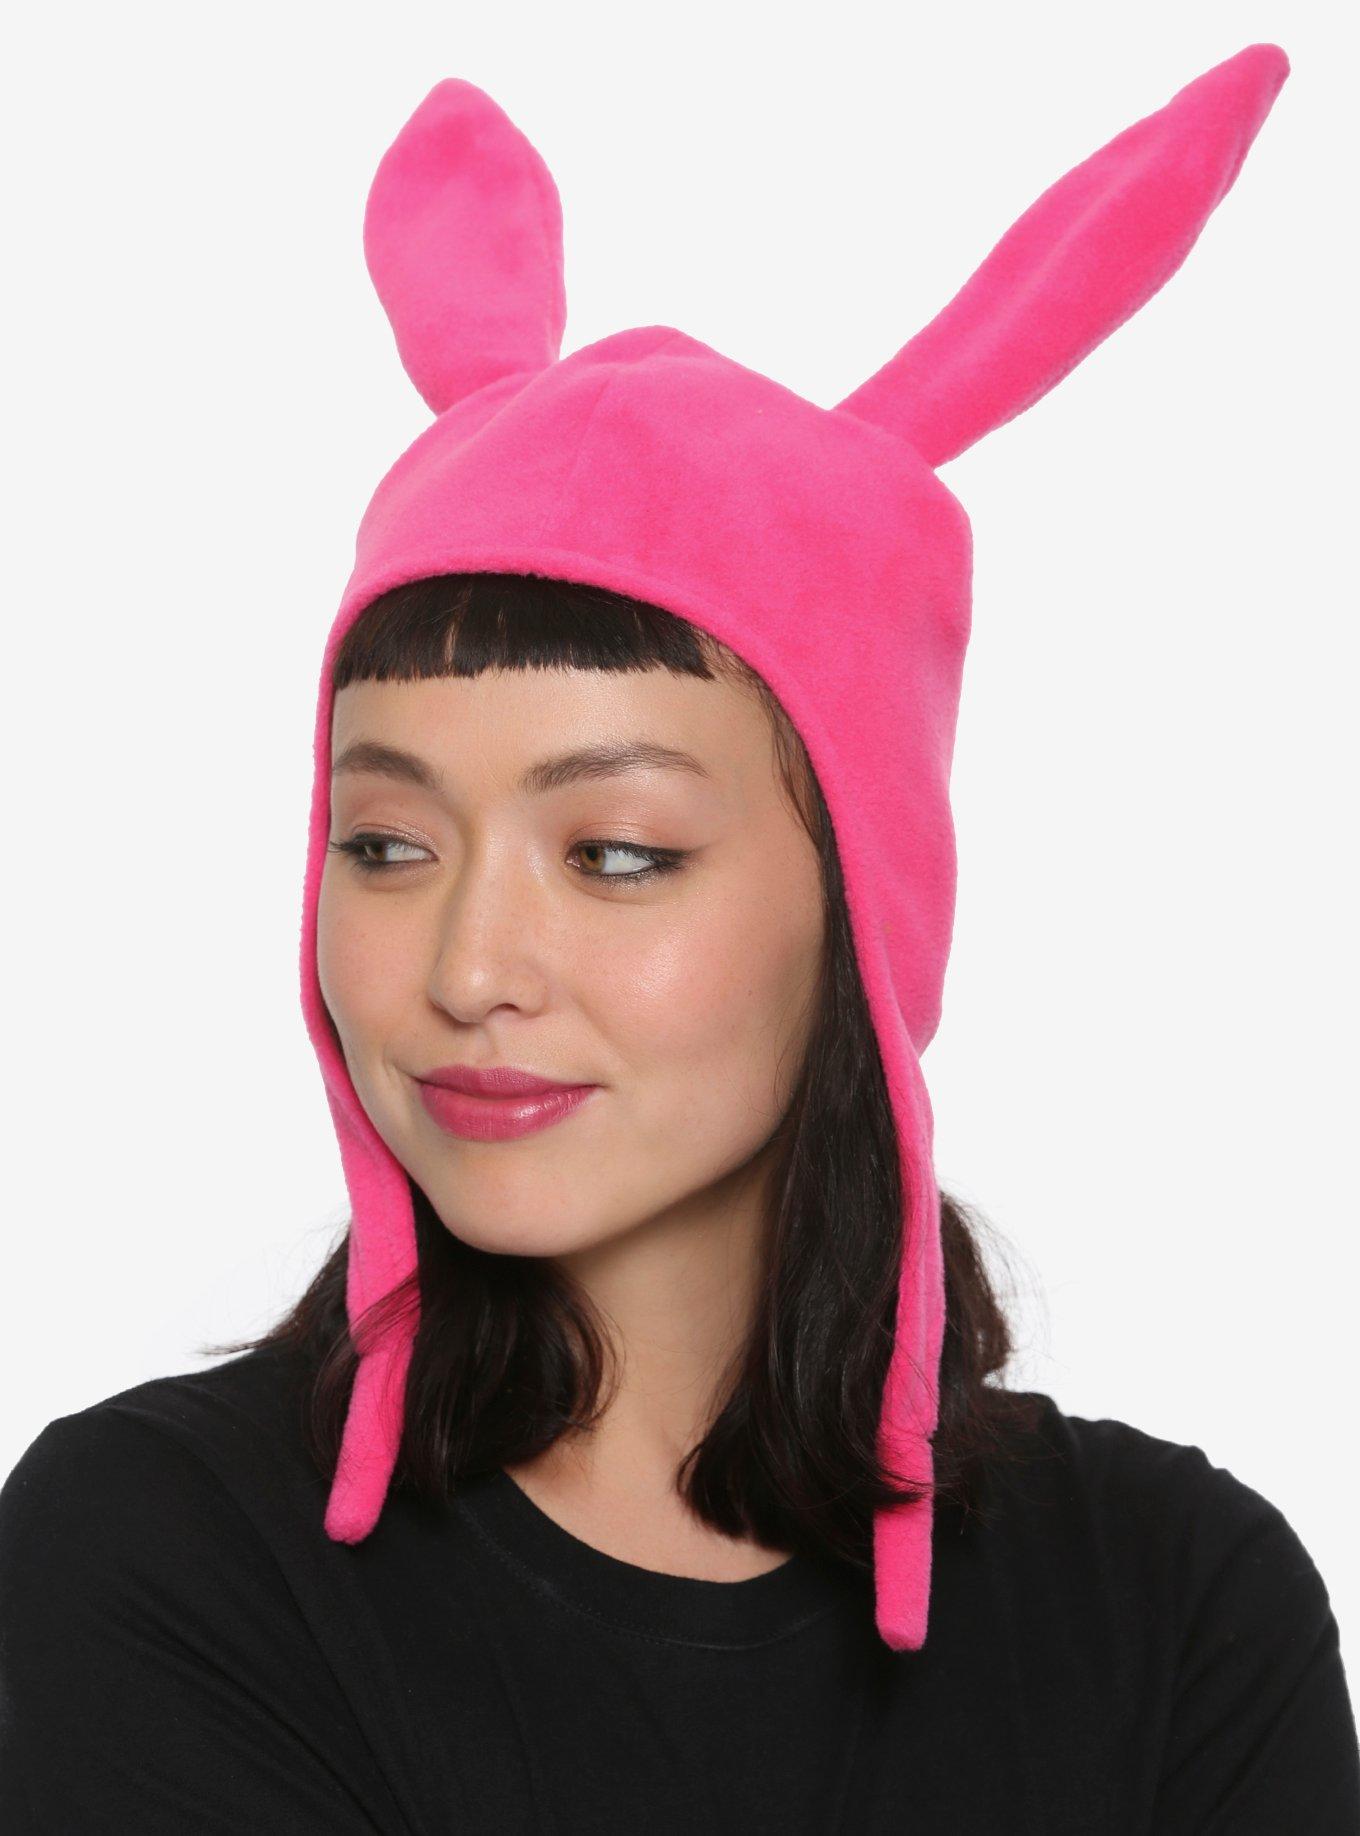 VAMSII Carton Fans Gift Pink Rabbit Ear Hat Louise Belcher Quotes Makeup  Bag Why Don't You Try Speaking in Words Zip Organizer (Pink)